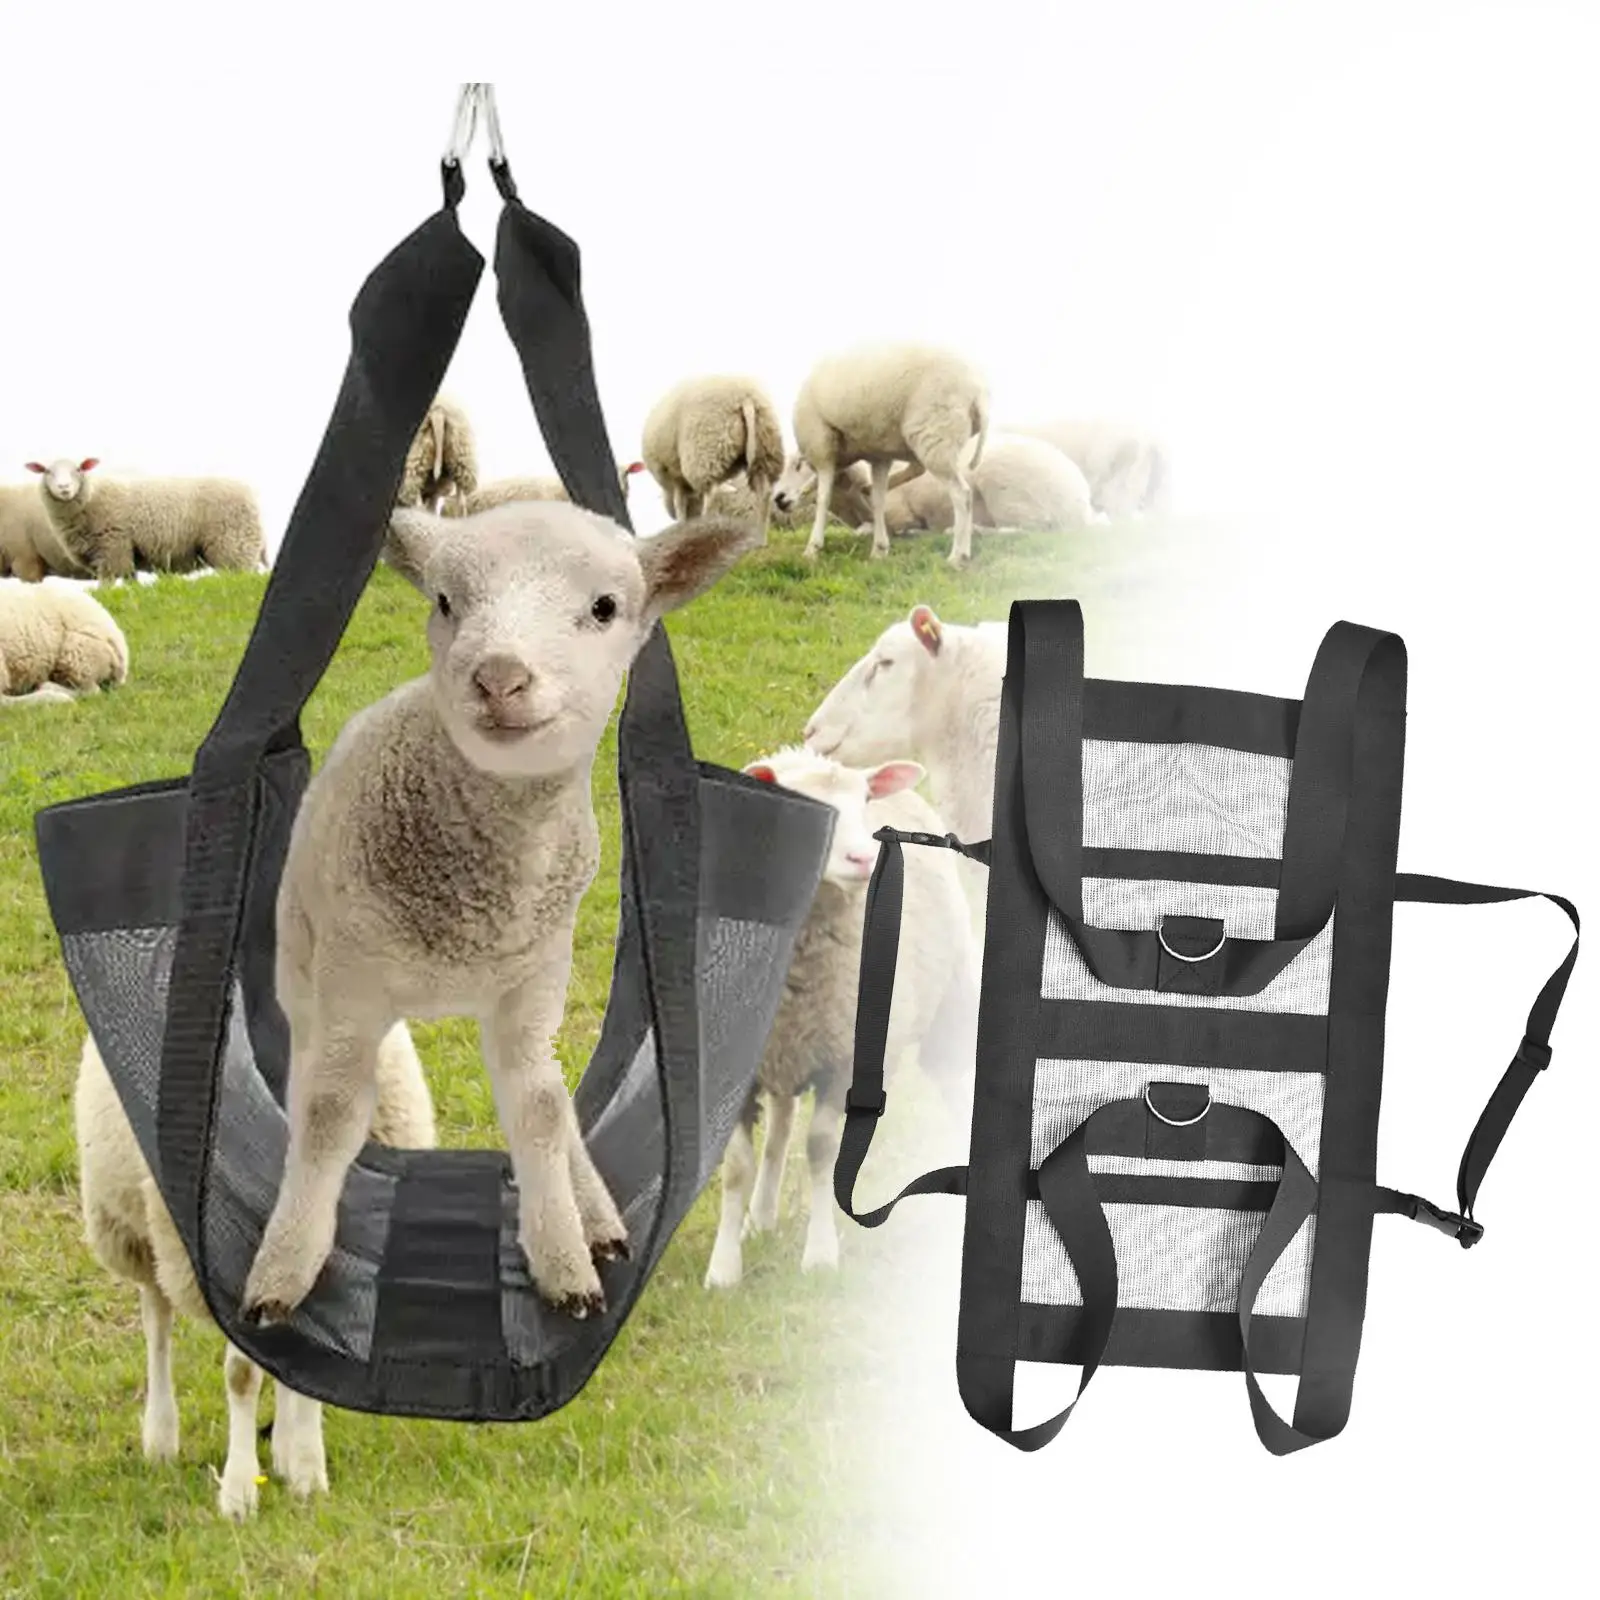 Calf Sling for Weighing Small Animals Durable Lightweight 300lbs Practical Hanging Scale Sling for Pigs Sheep Goats Dogs Lambs